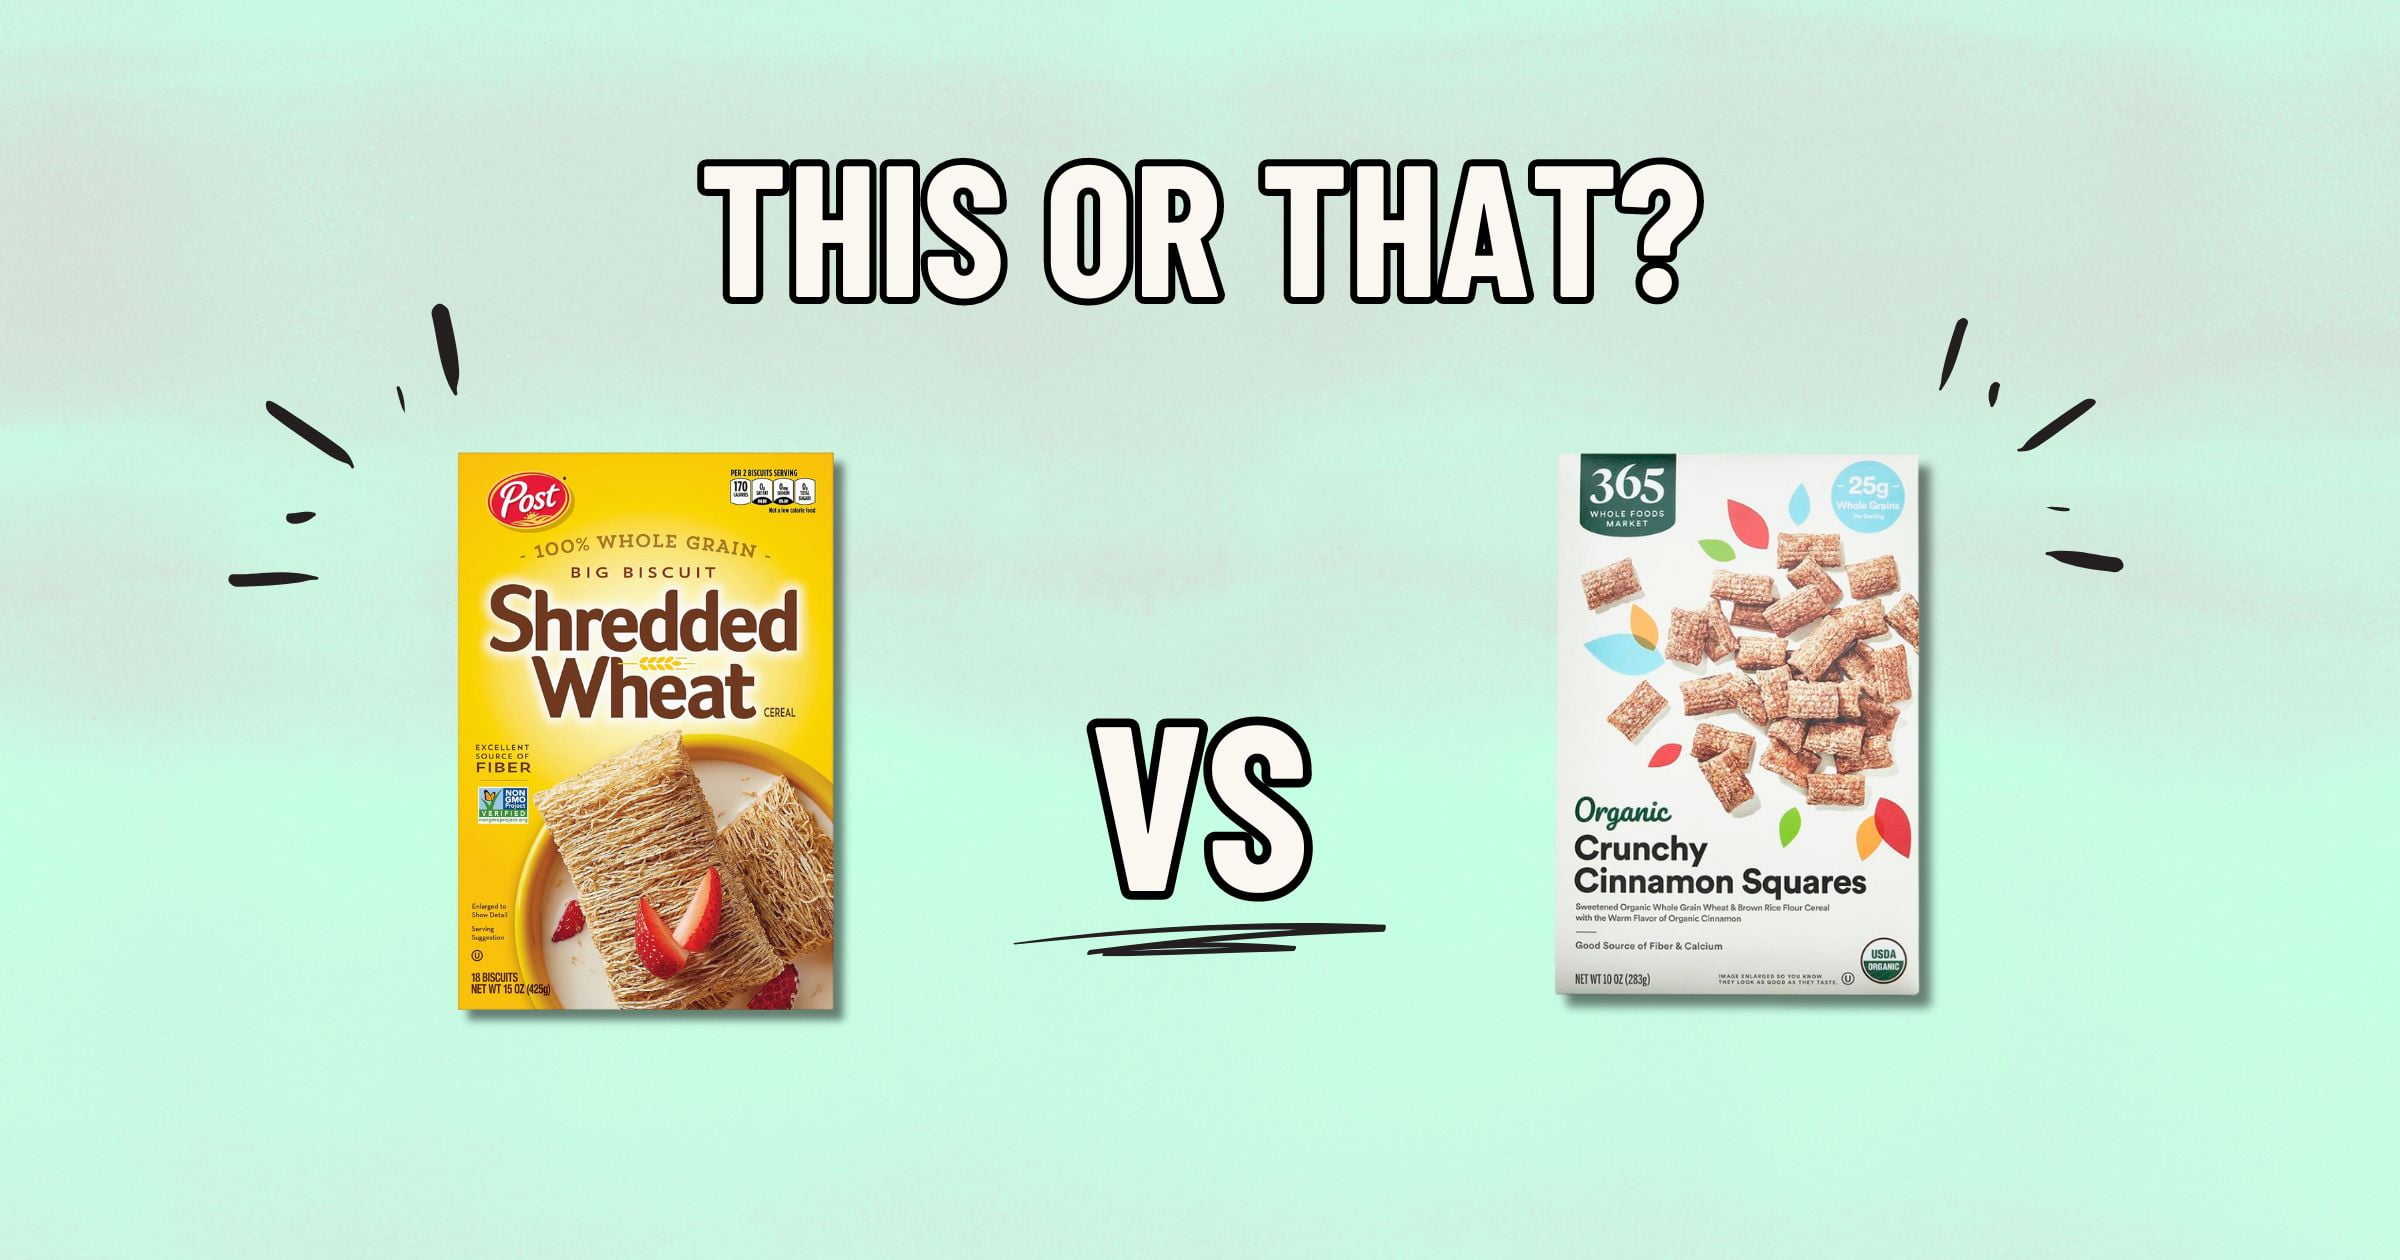 An image featuring a comparison of two cereal boxes. On the left is a box of Shredded Wheat, and on the right is a box of Organic Crunchy Cinnamon Squares. The text "THIS OR THAT?" is written above with "VS" in the center between the two healthier options.